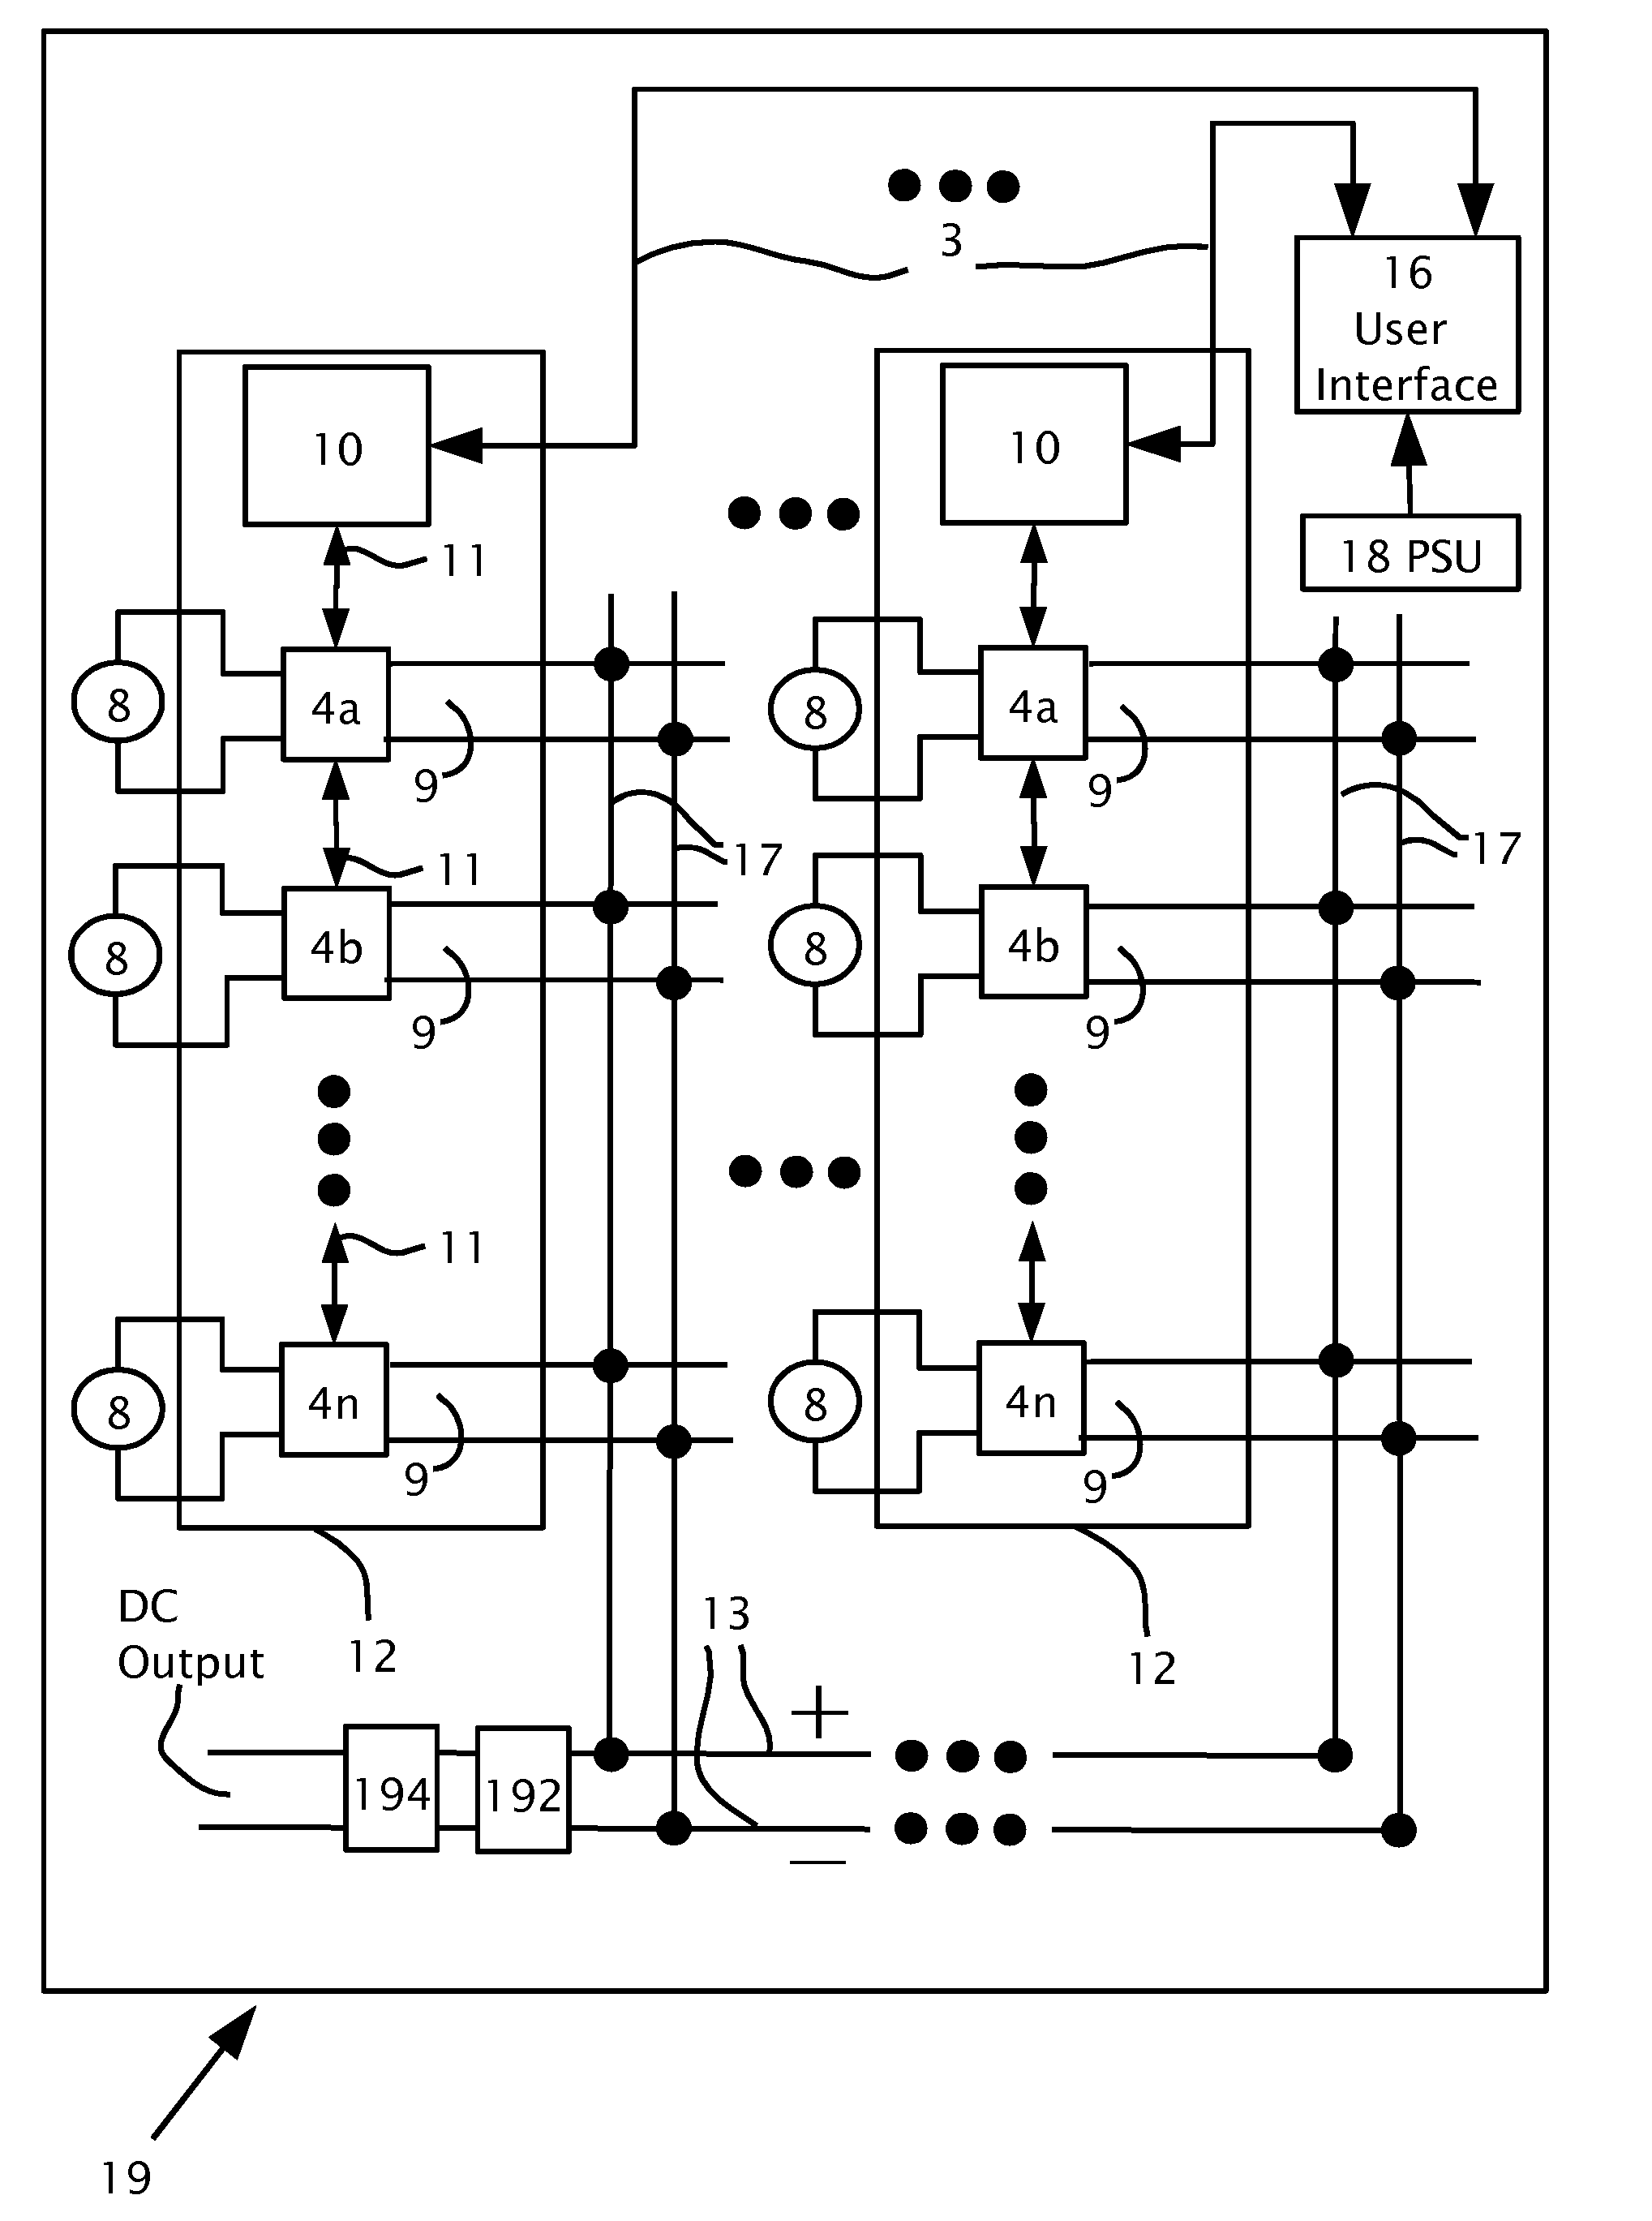 Disconnection of a String Carrying Direct Current Power